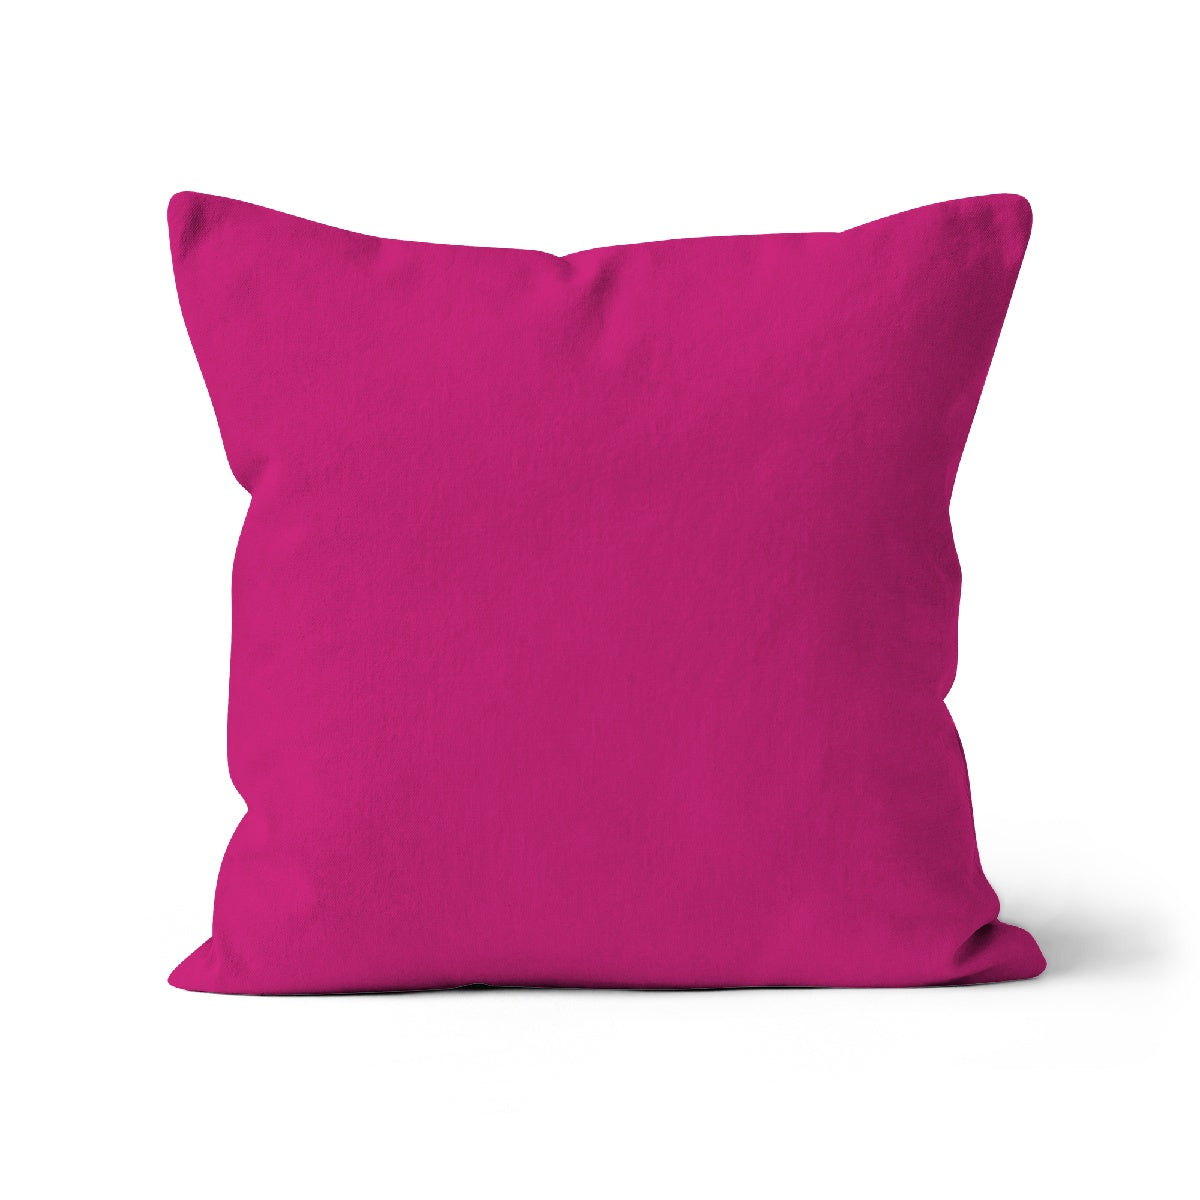 Free shipping. Bright pink cushion cover. 100% organic cotton. Organic Homeware. Scatter cushion covers. Square pink pillow cushion cover. Printed both sides. Double-sided colour. Machine washable cushion covers.